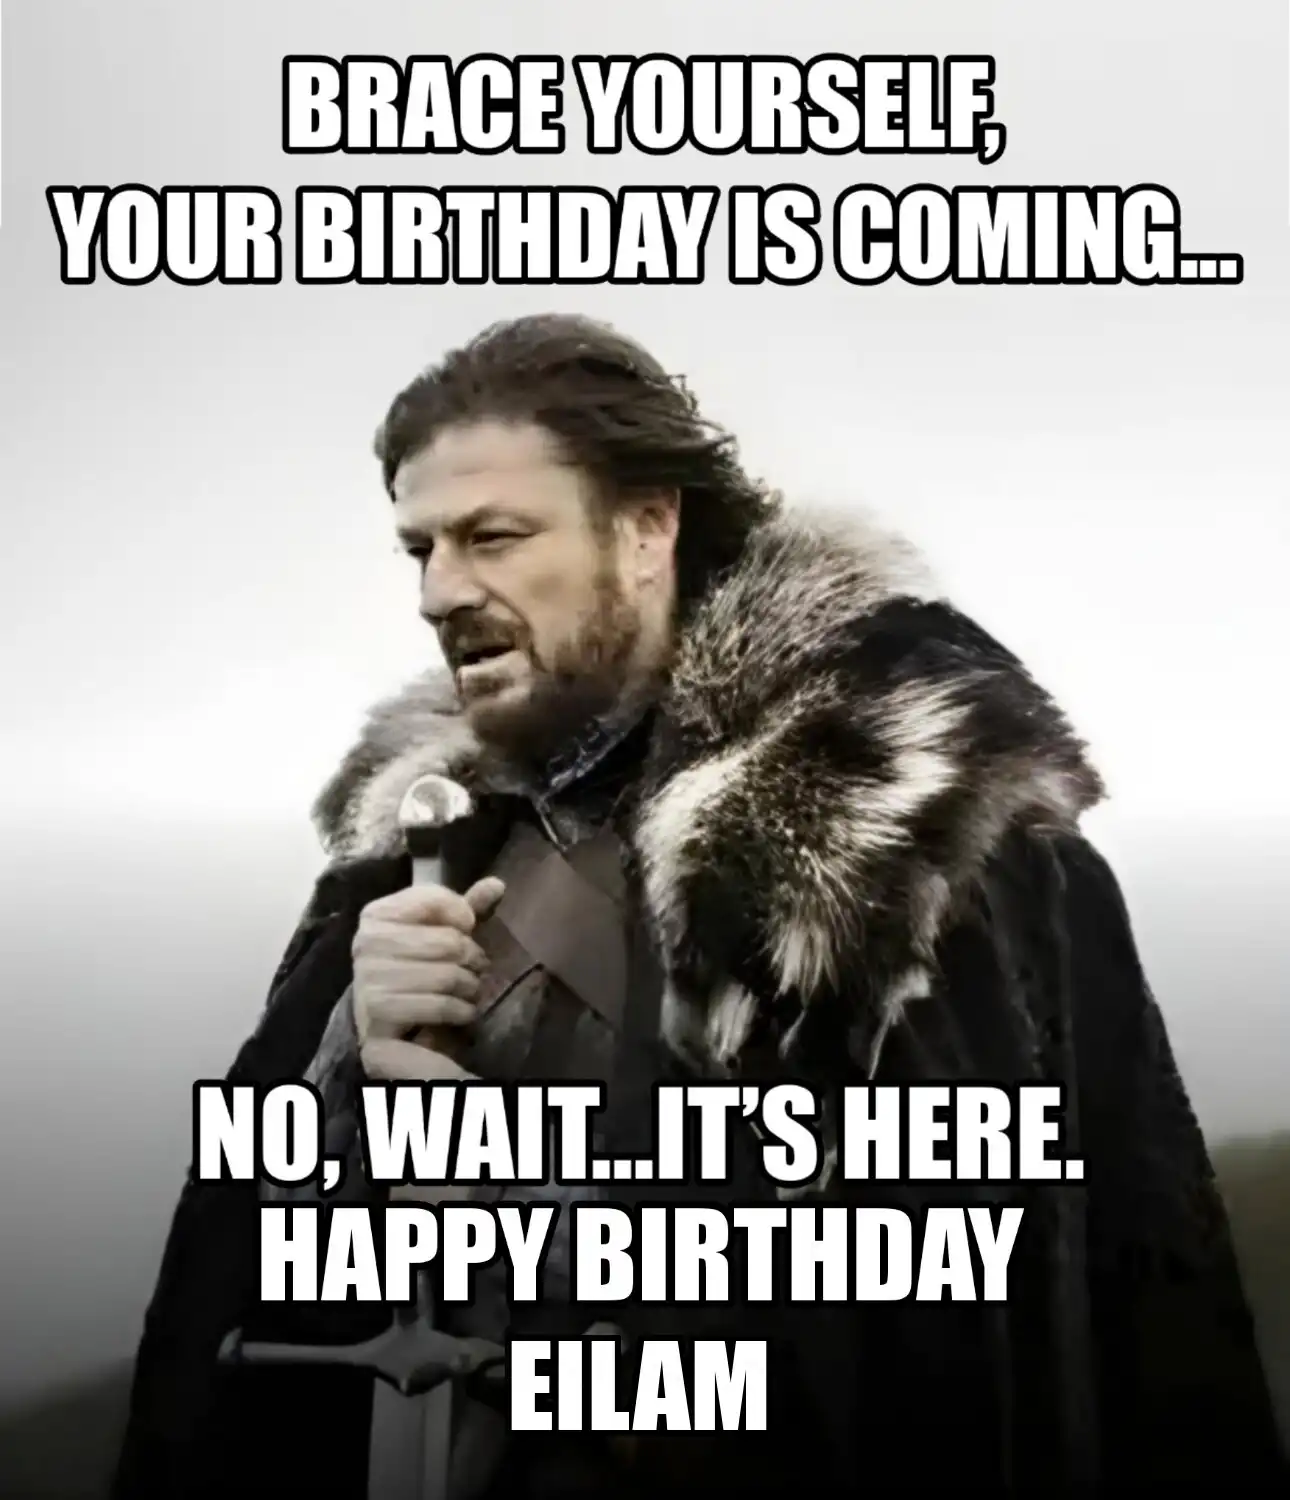 Happy Birthday Eilam Brace Yourself Your Birthday Is Coming Meme